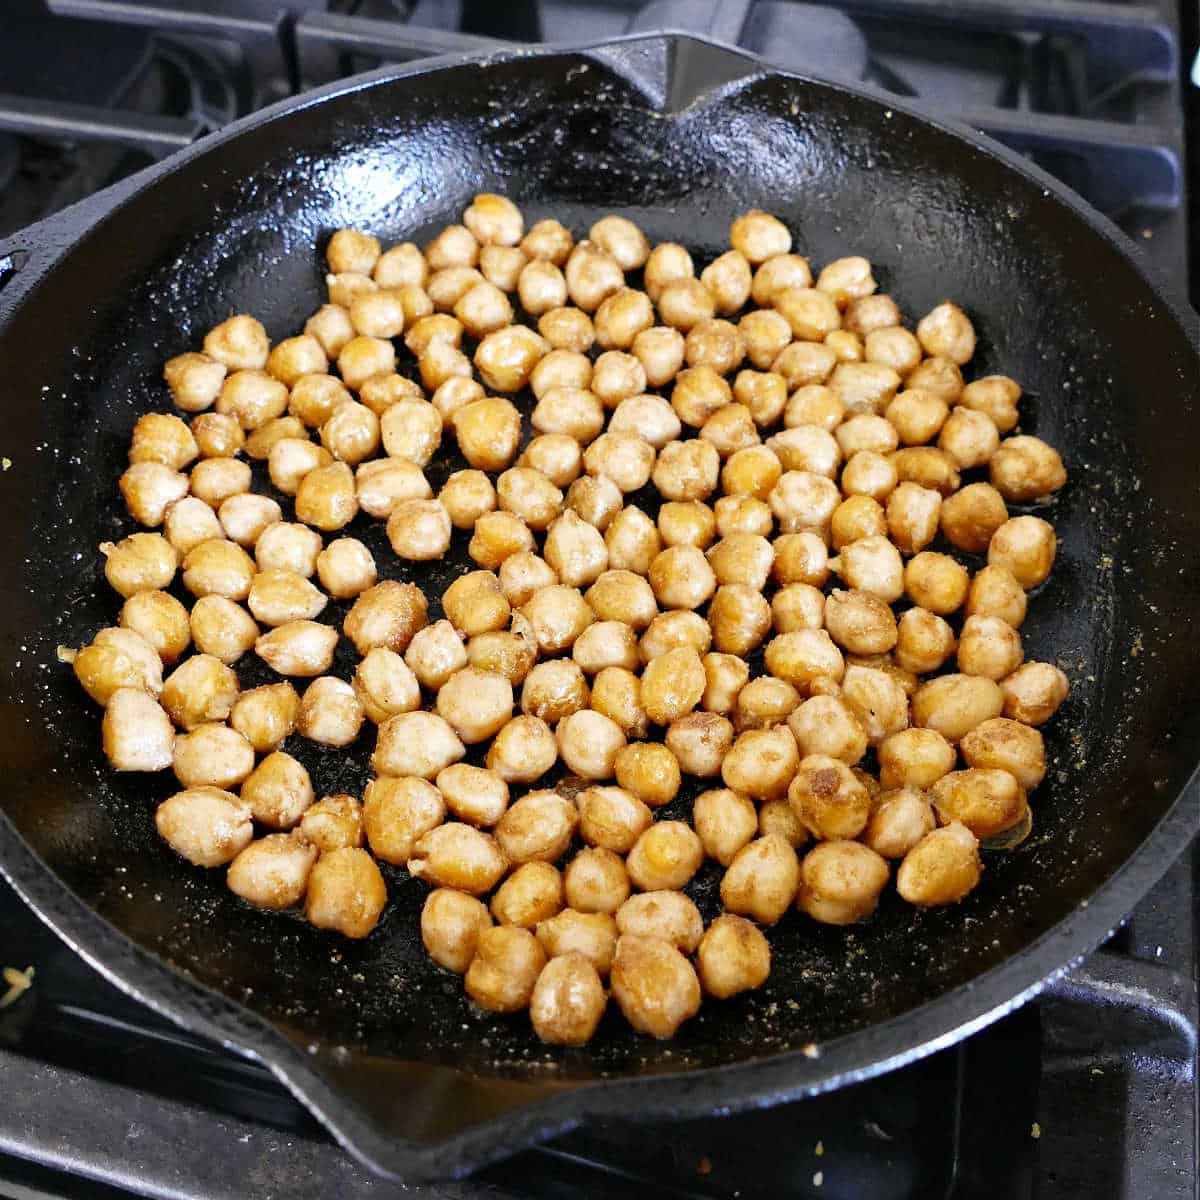 garbanzo beans cooking in olive oil and seasonings in a skillet